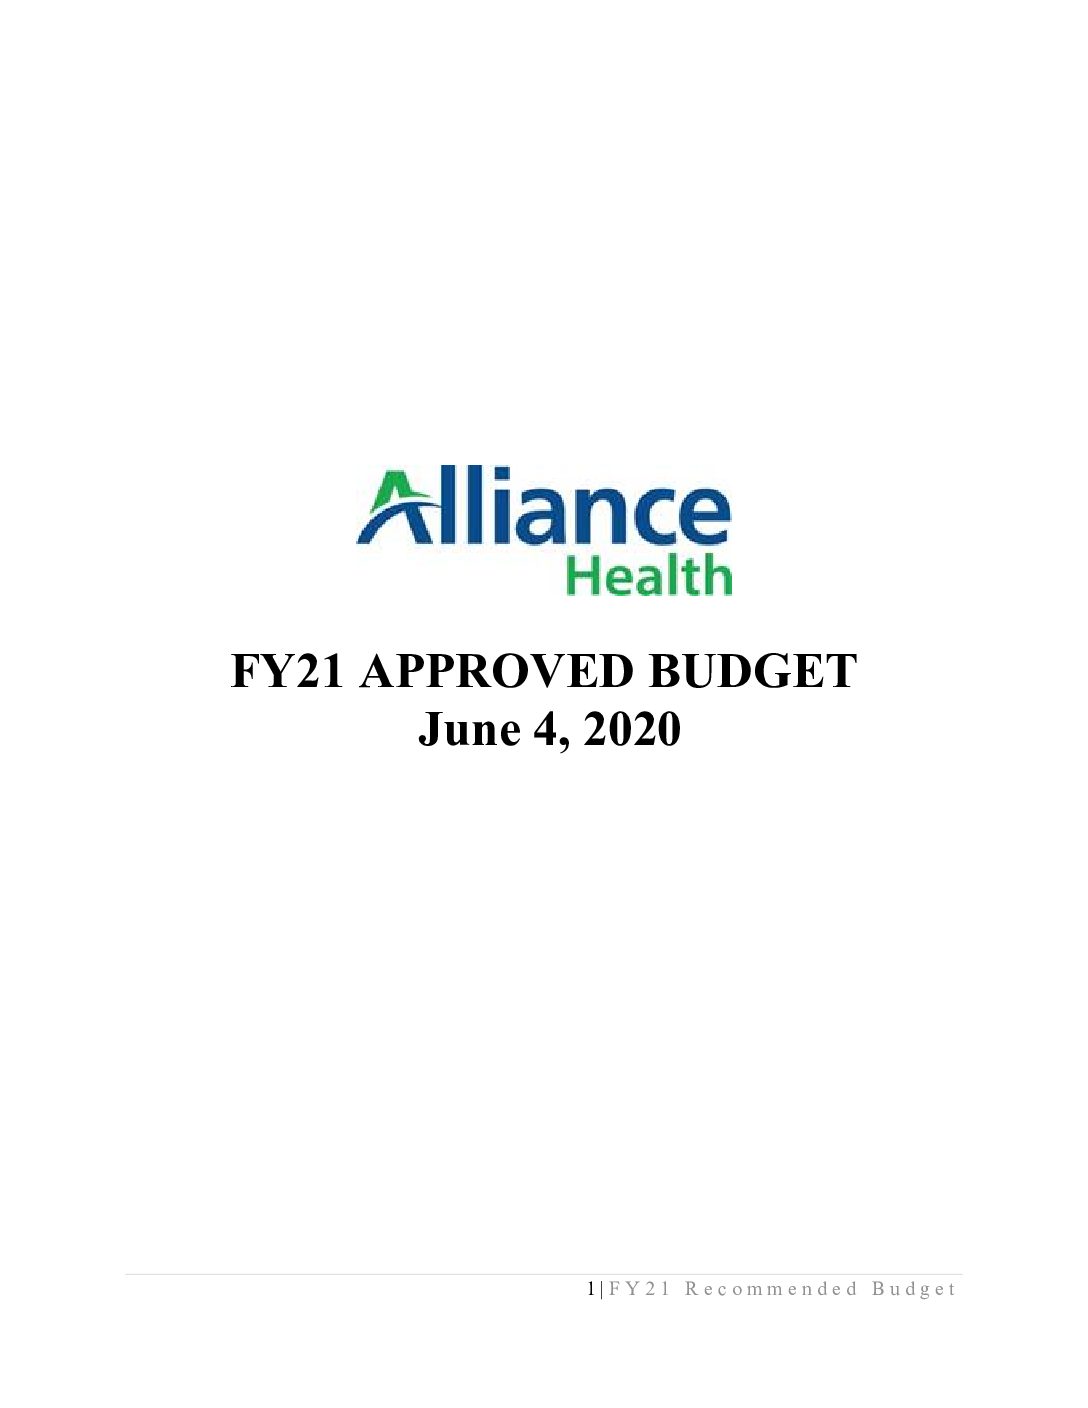 FY21 Approved Budget